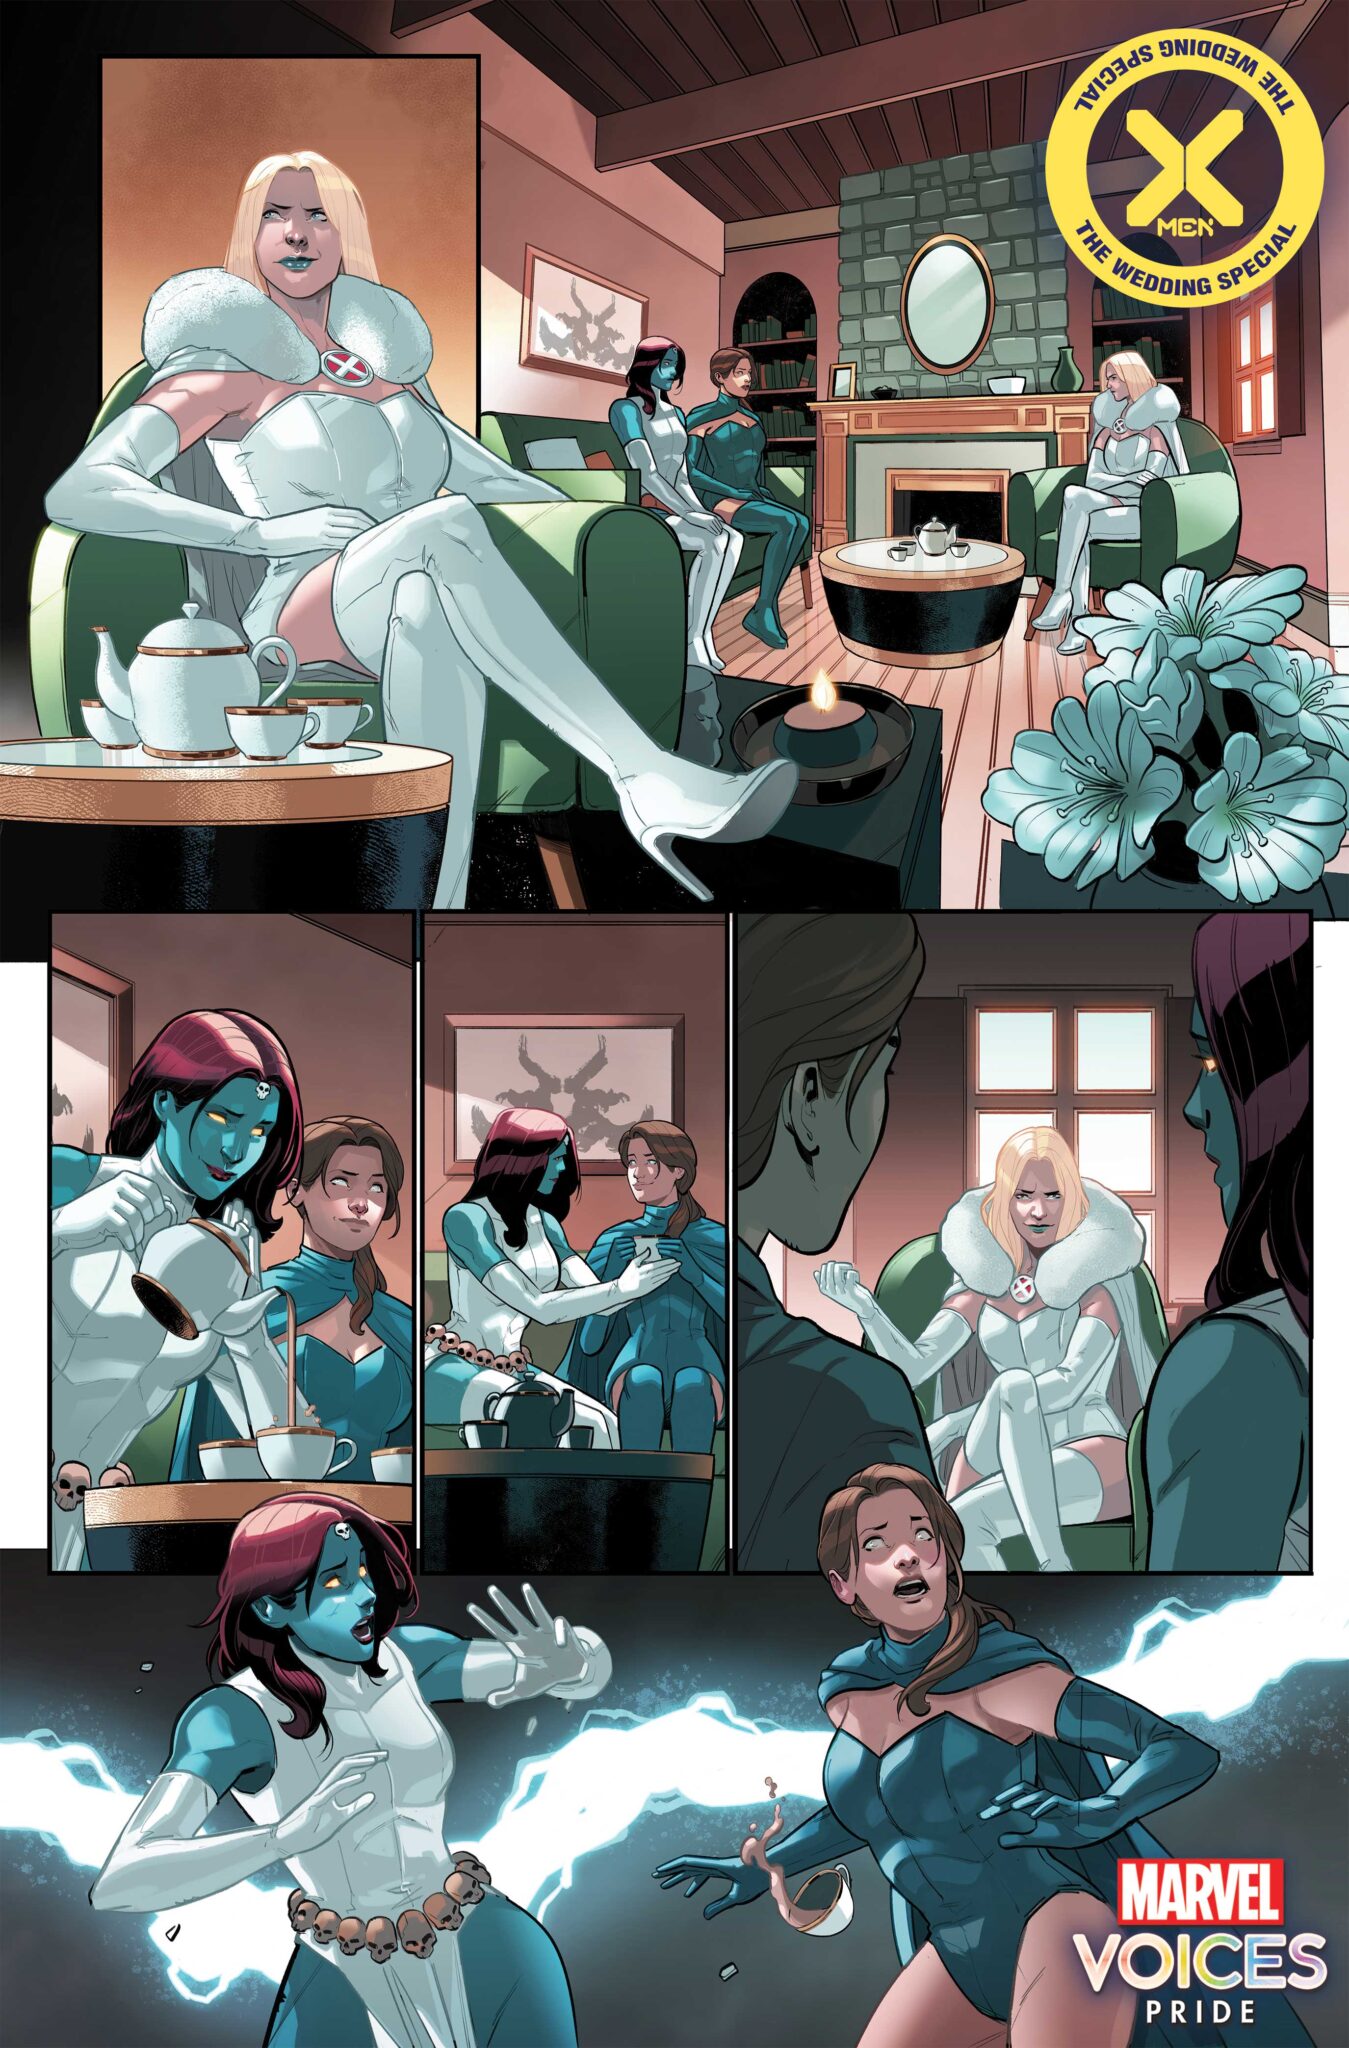  X-Men: The Wedding Special Ha Lee/Byrne preview